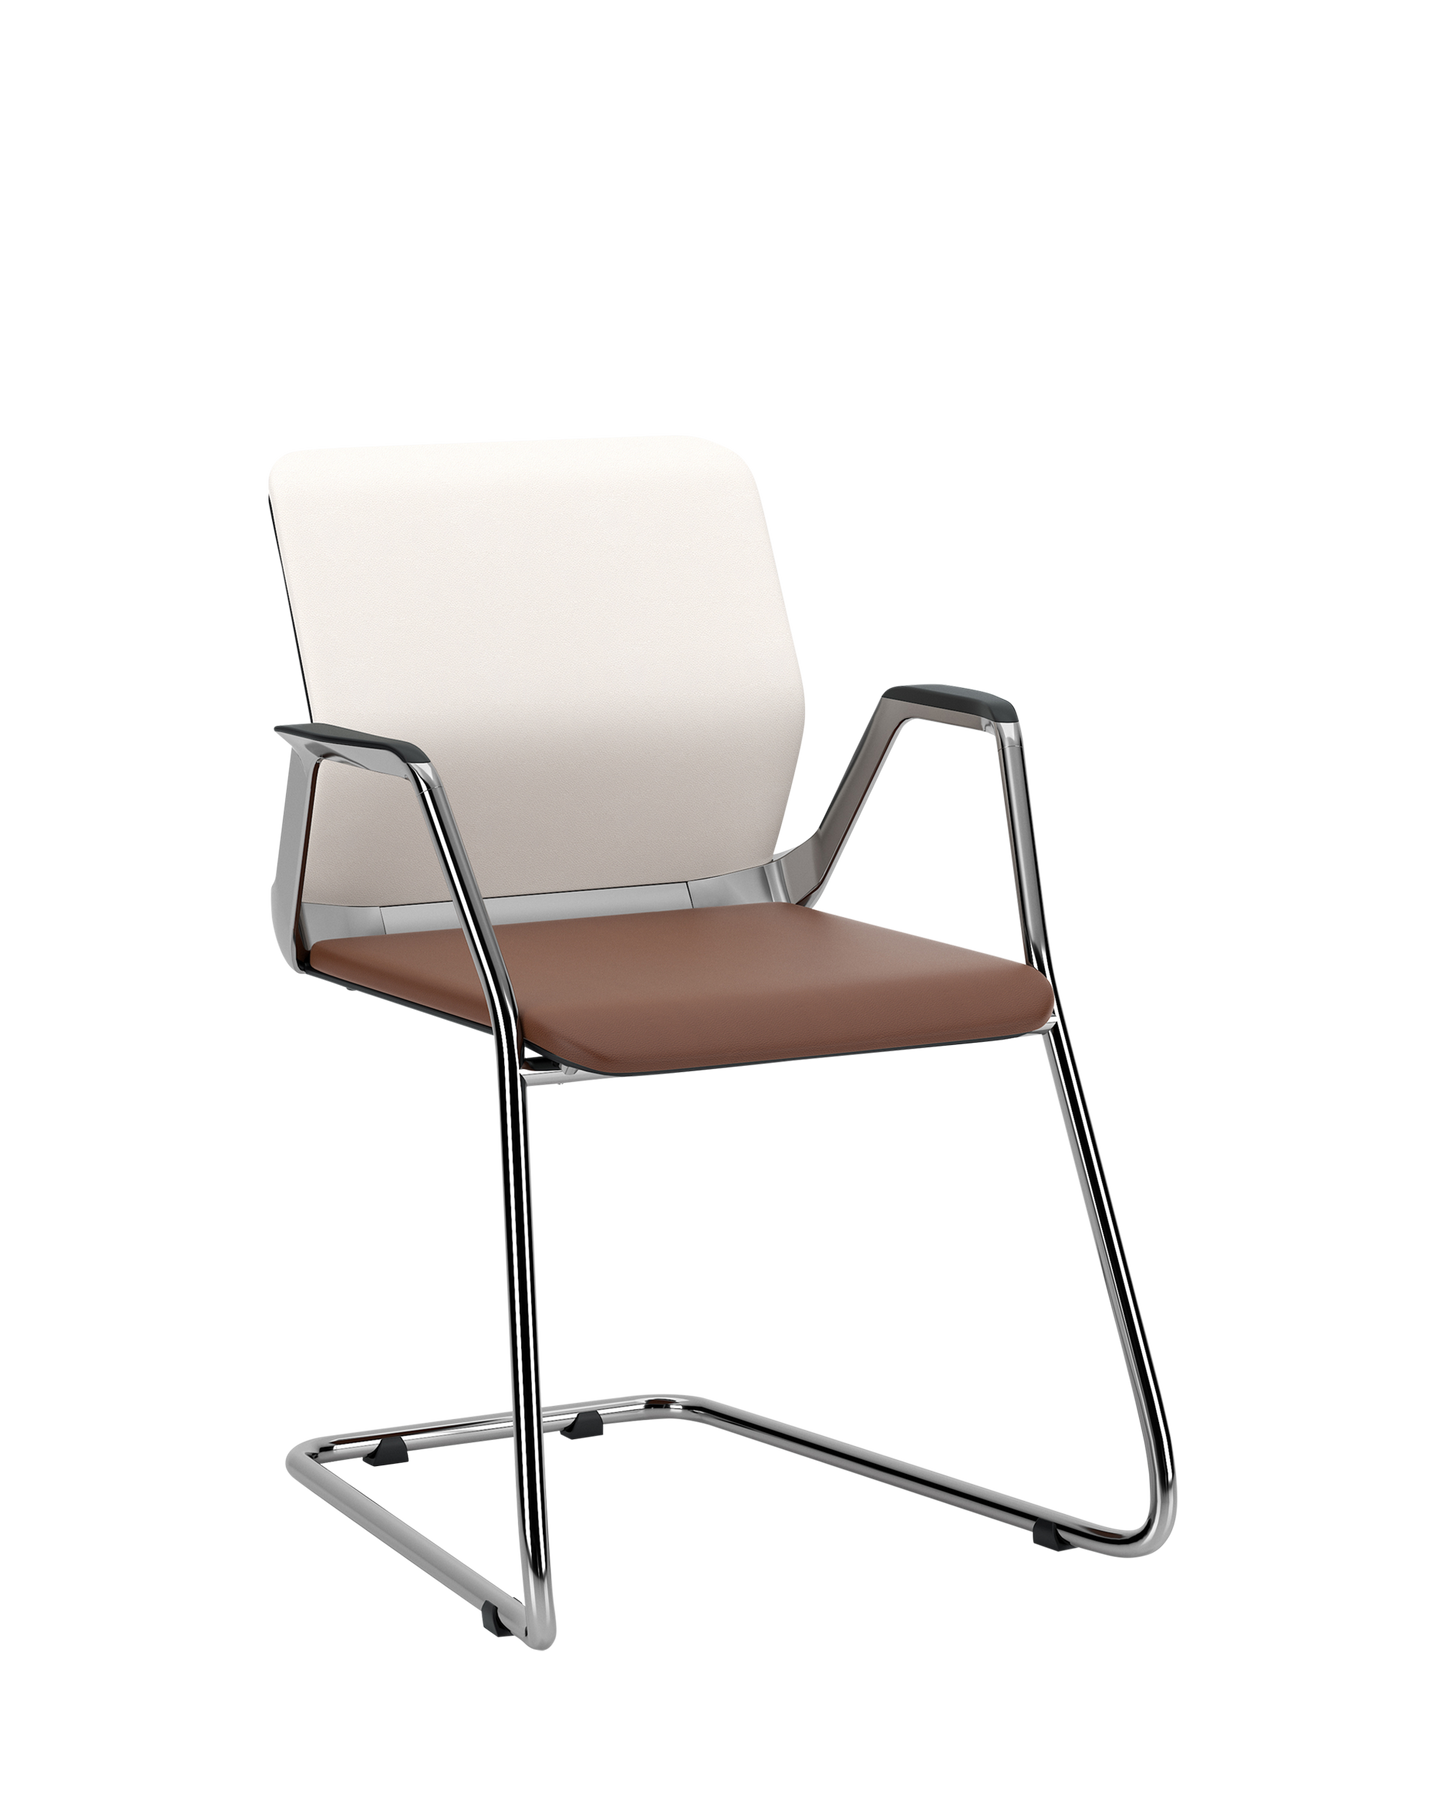 YouTEAM Chair